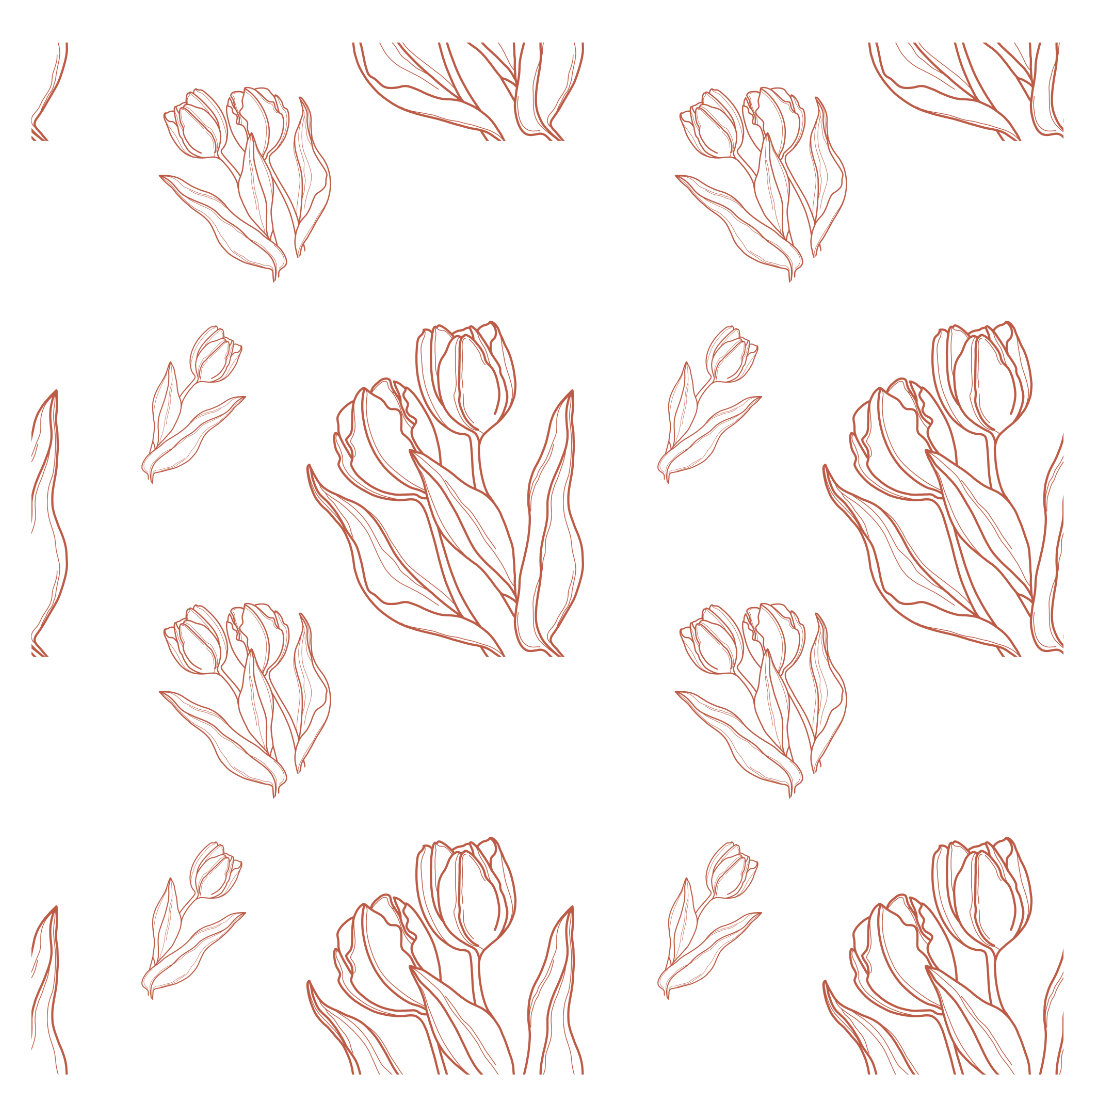 Line drawing of tulips on a white background.